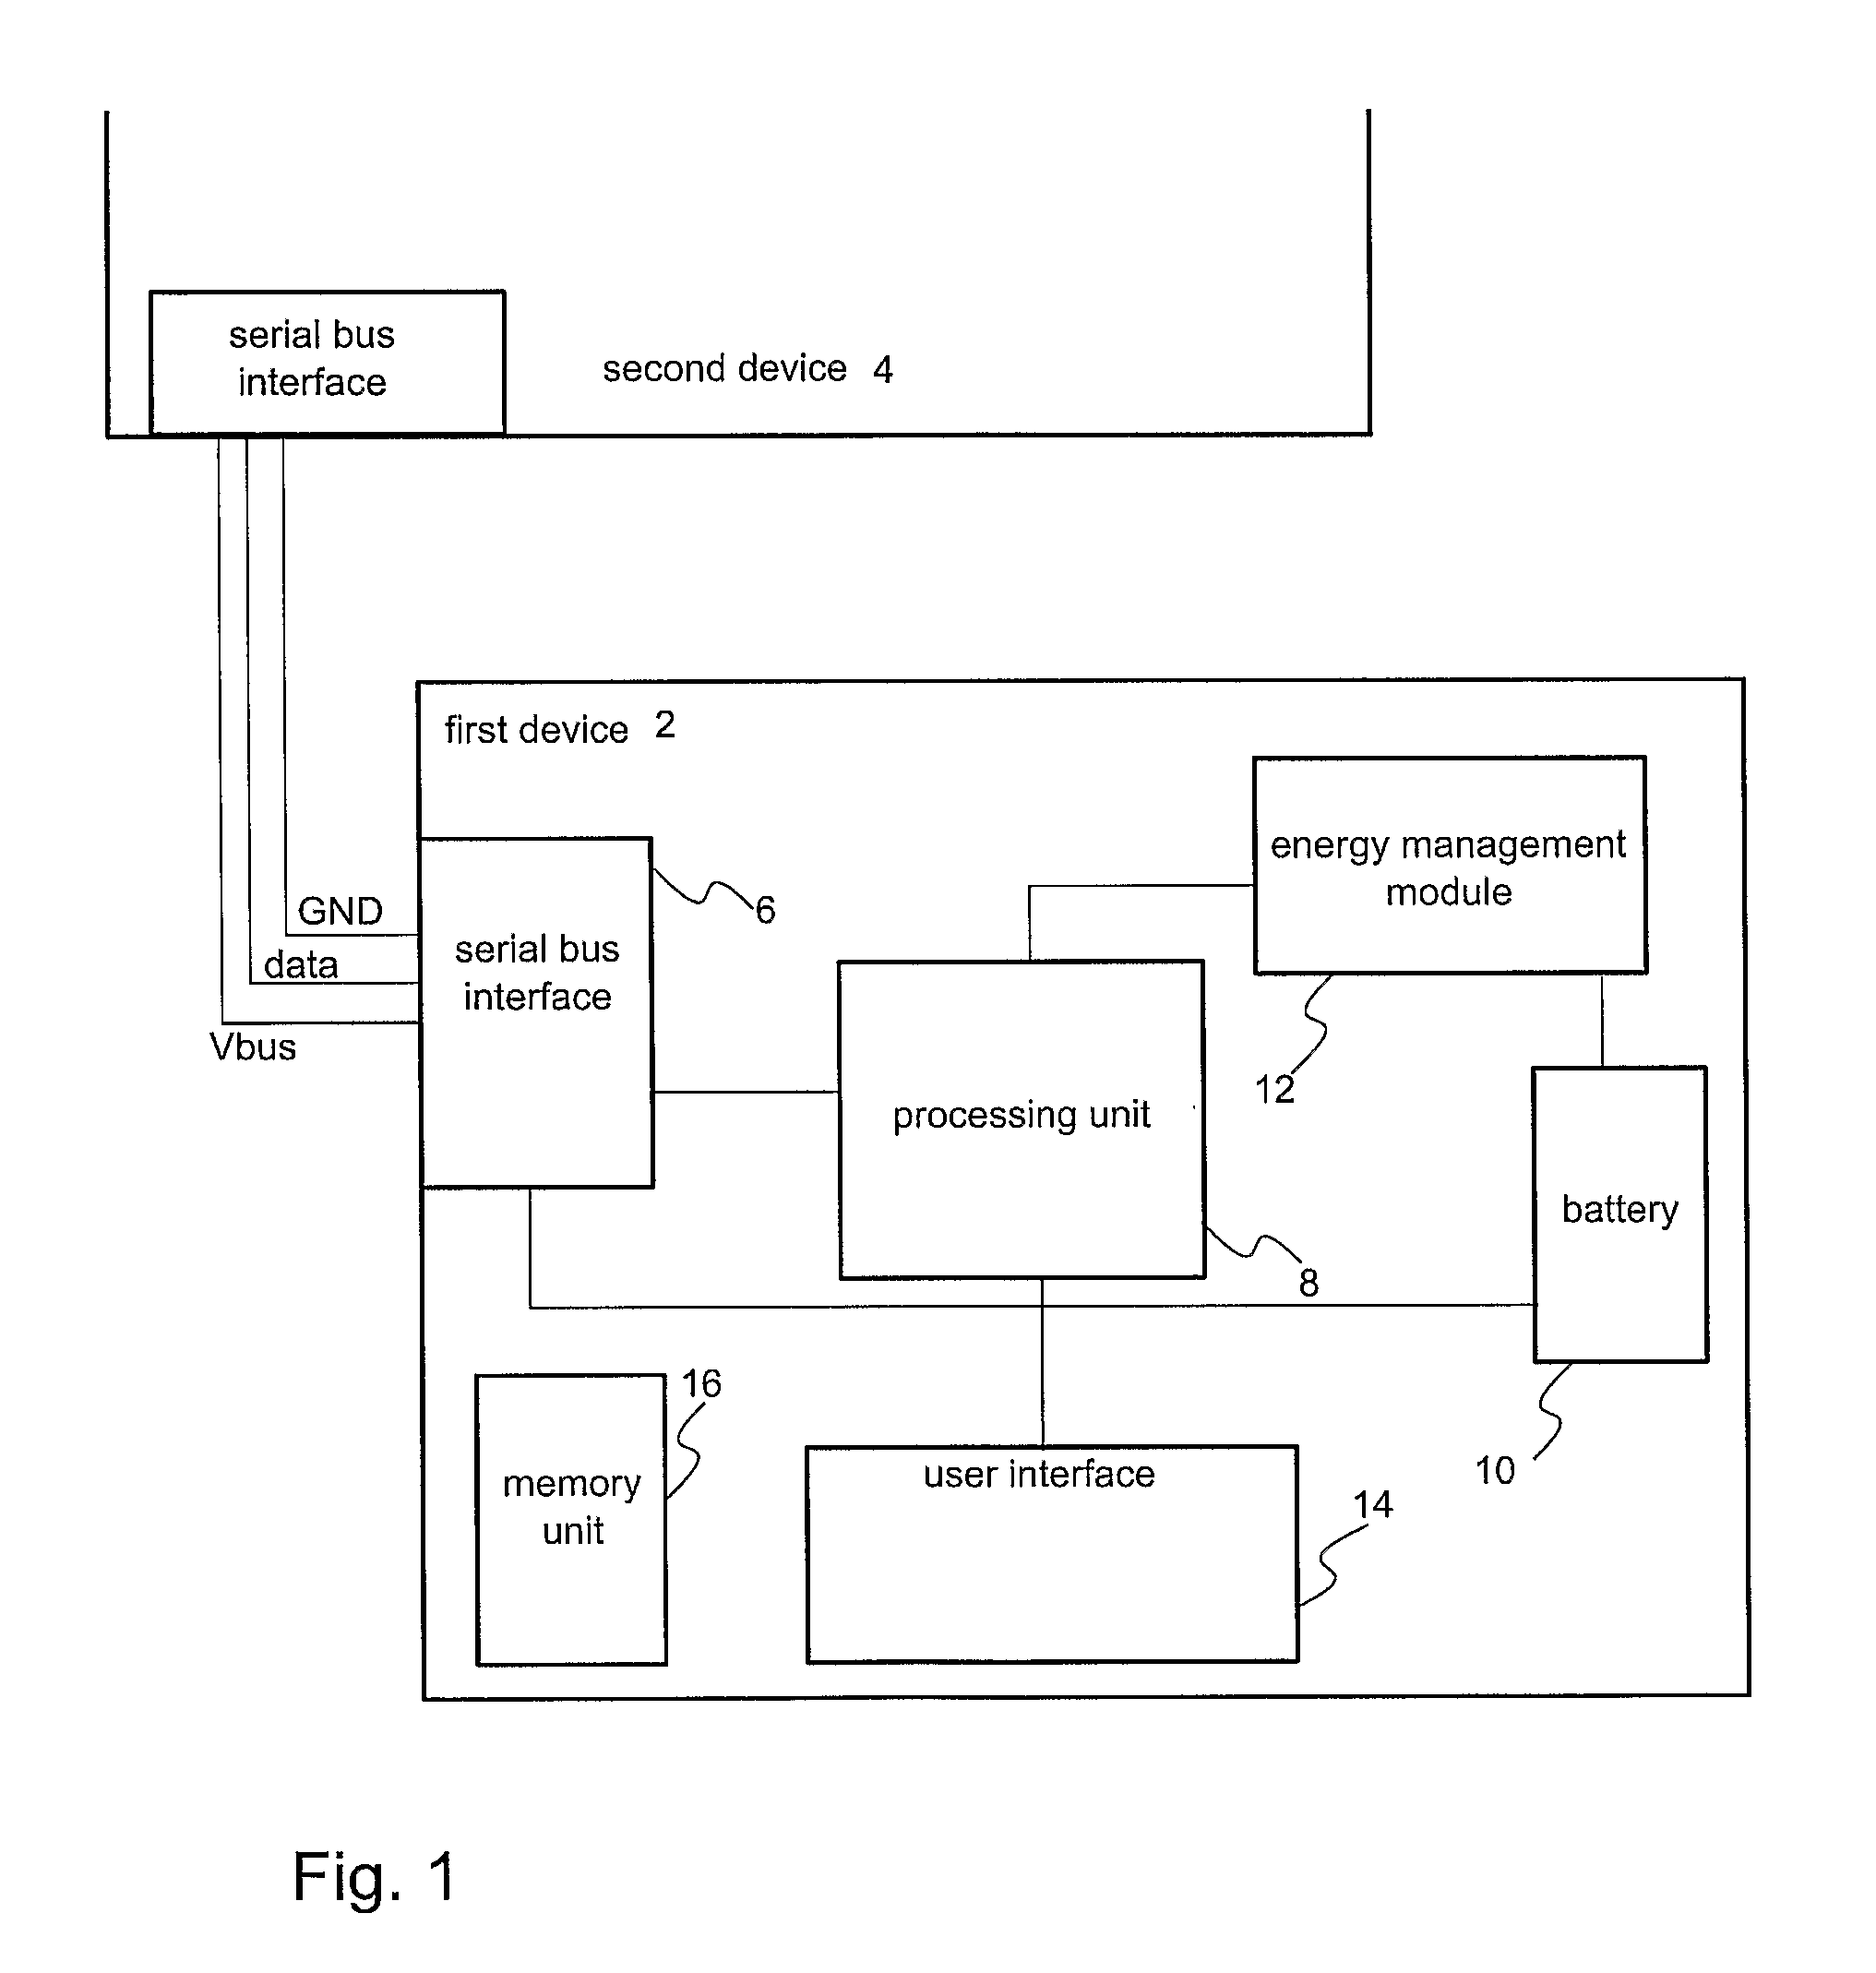 Method and device for activating functions of a powered-off device via a serial data bus interface